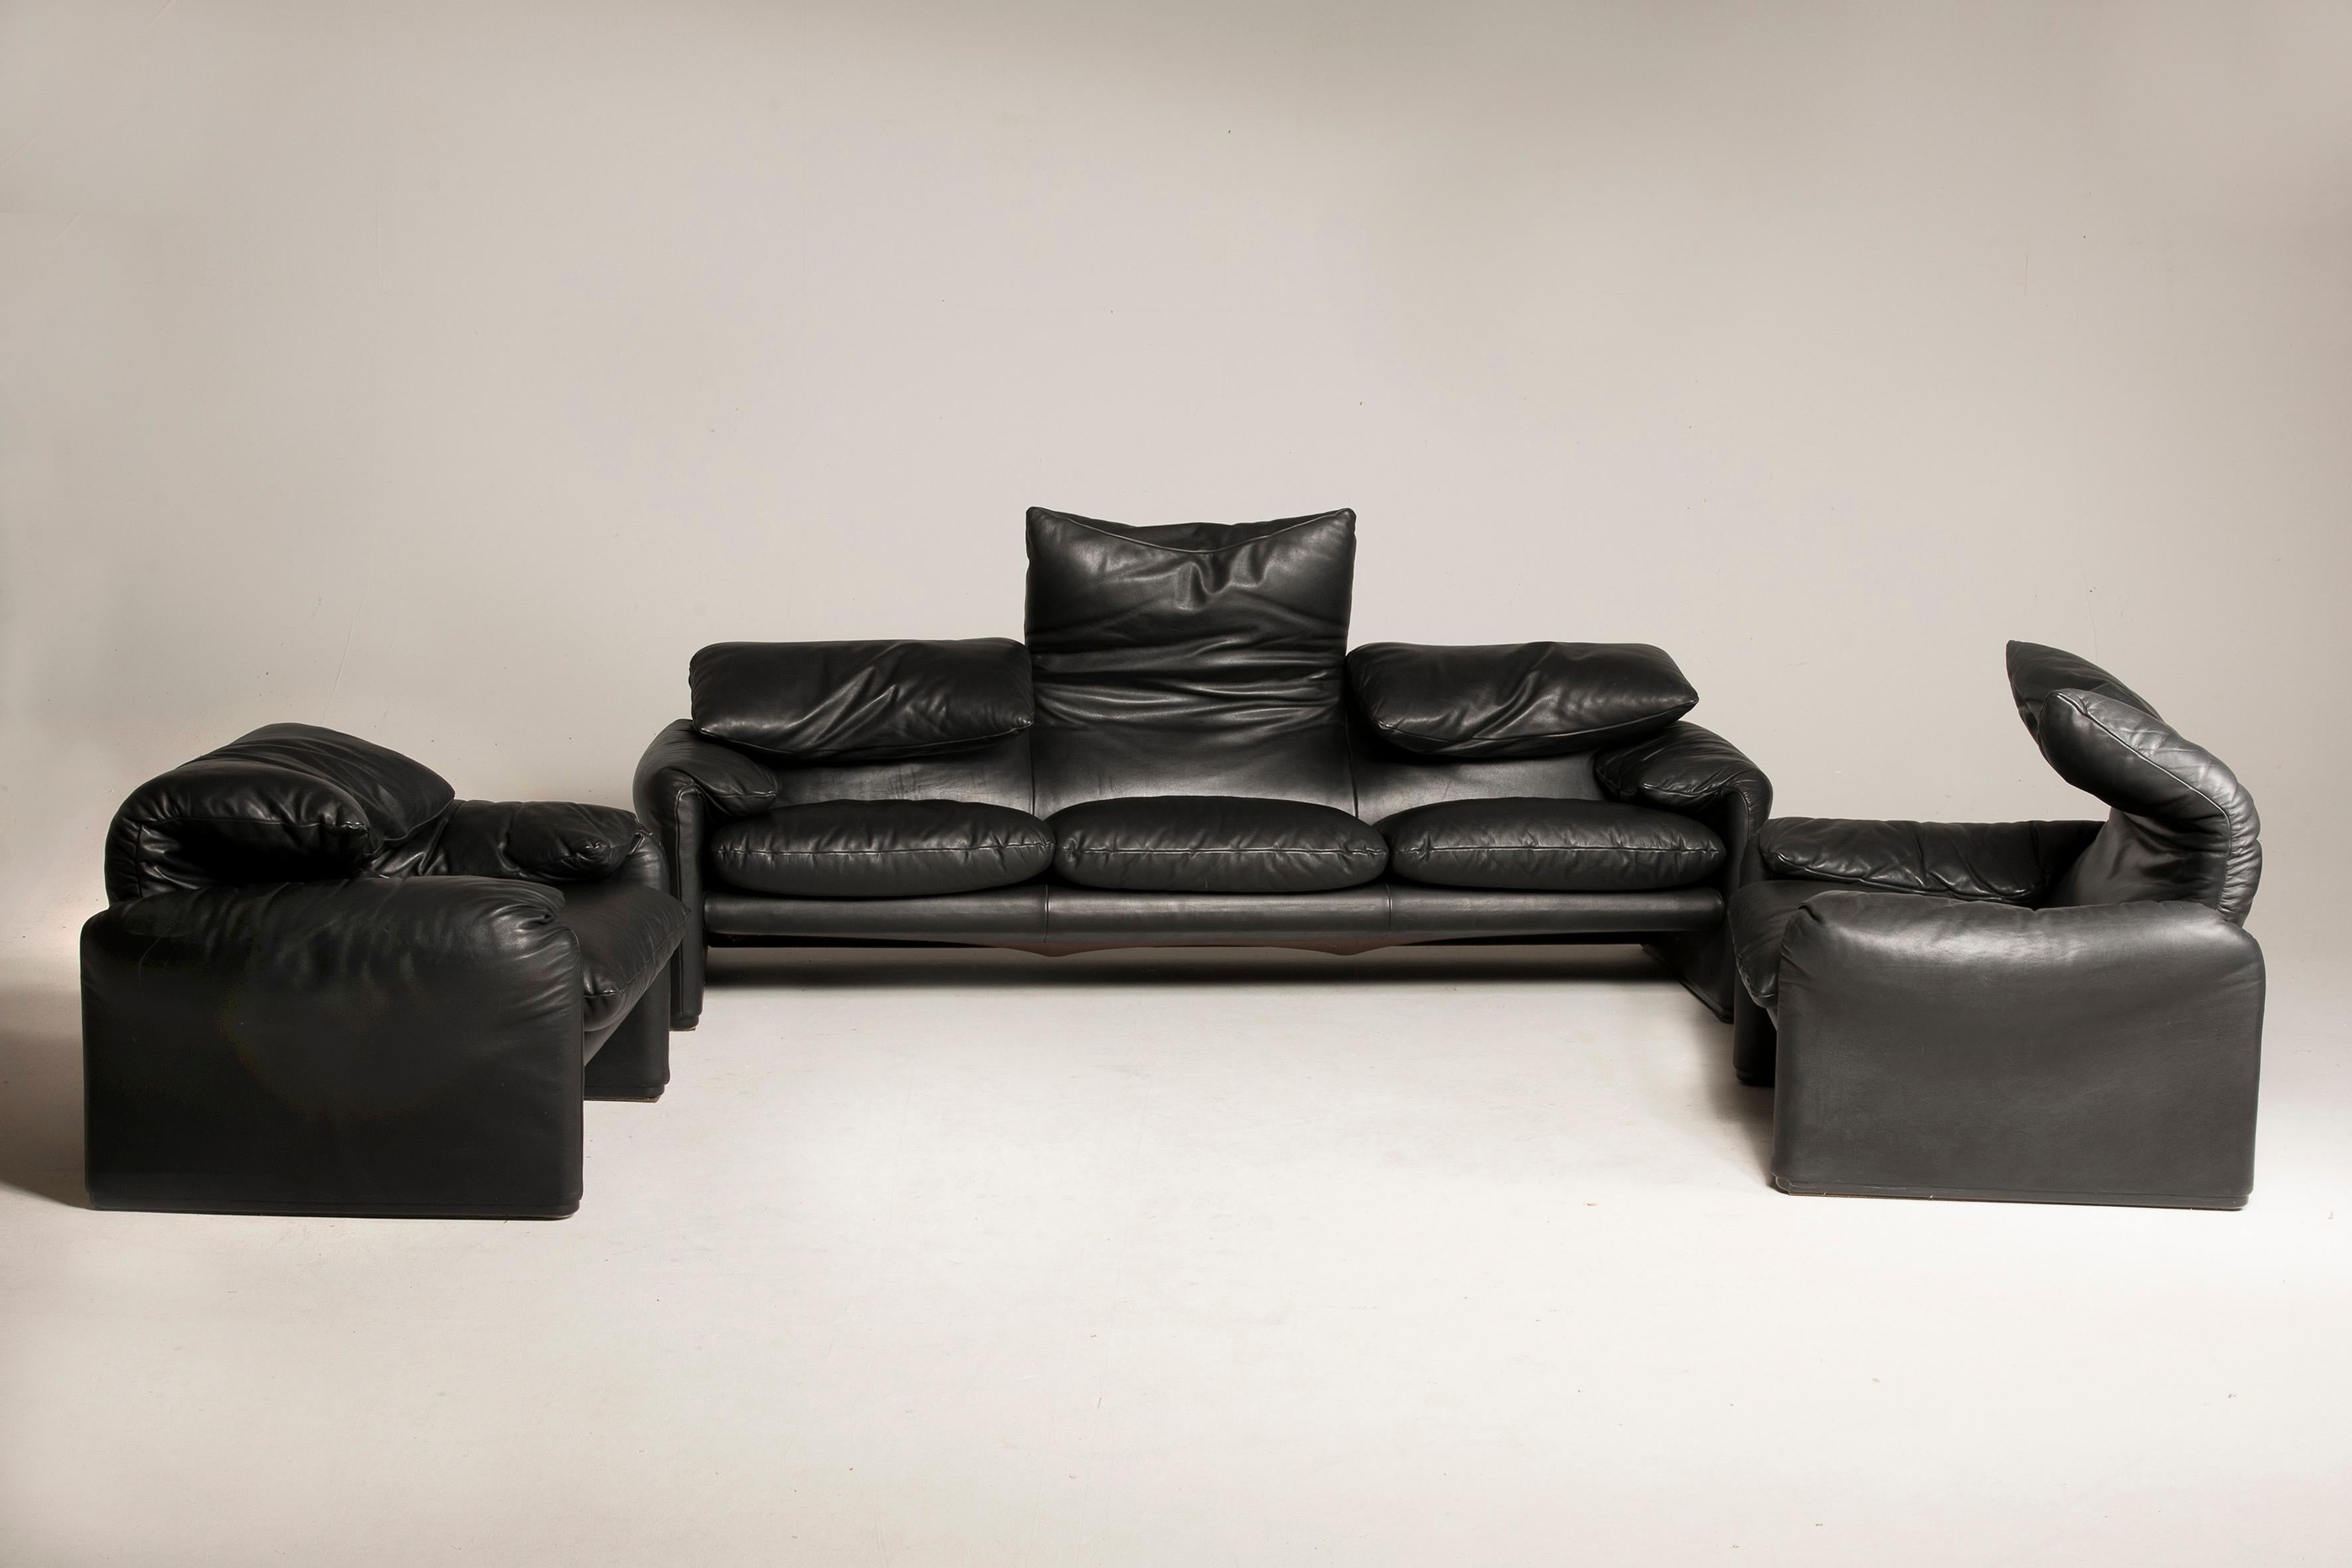 Maralunga is an emblematic sofa of Cassina, the work of architect and Industrial designer Vico Magistretti, designed in 1973. Winner of the Compasso d’Oro in 1979, Maralunga is the embodiment of the very idea of comfort, with an adjustable headrest